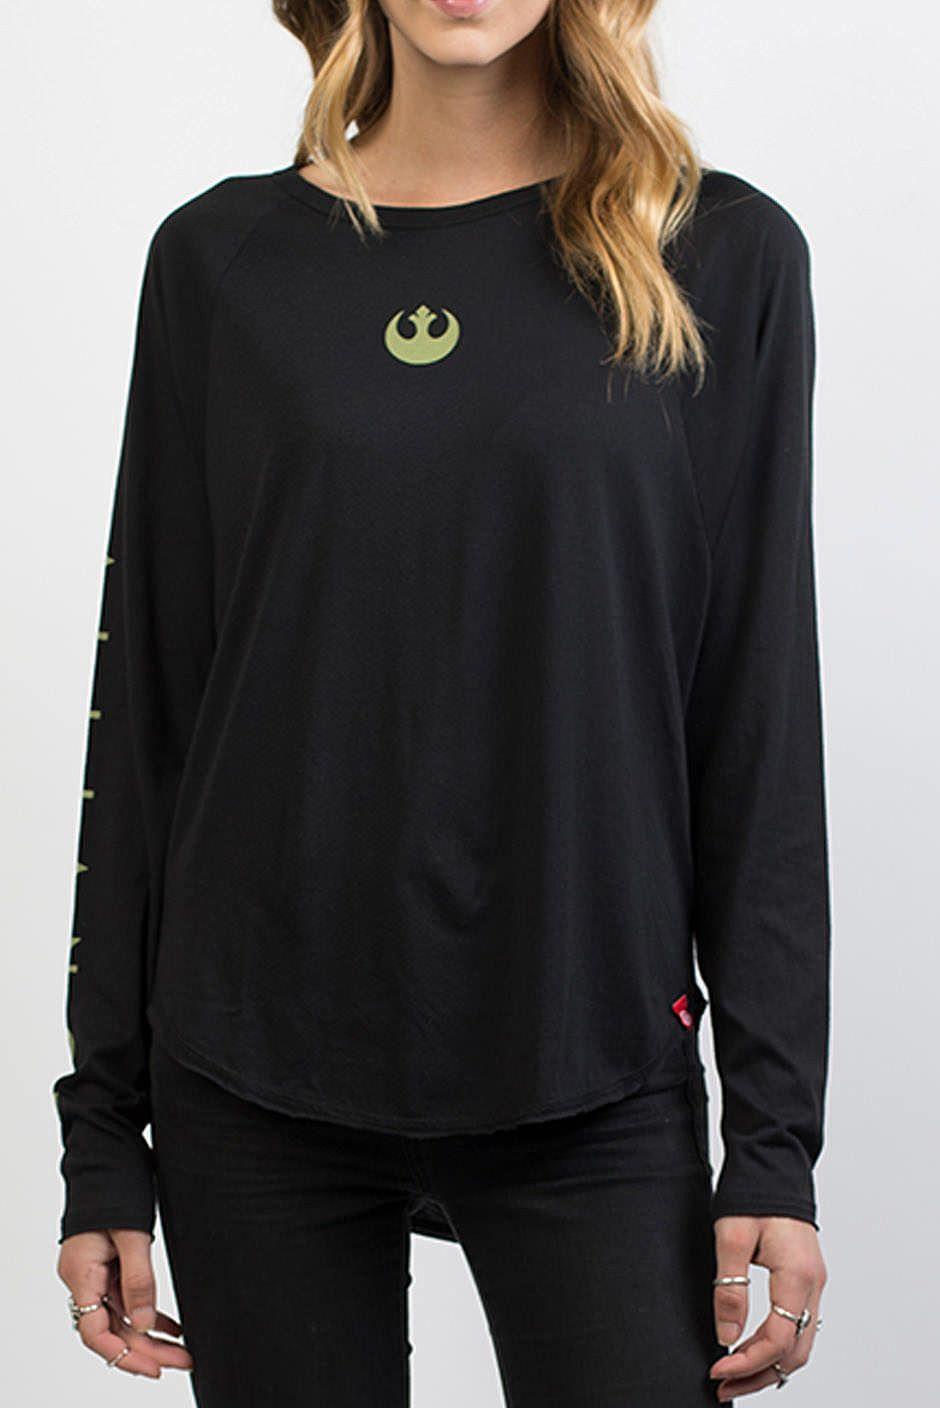 Neff Girl Logo - NEFF's New Star Wars Crossover Collection is Here